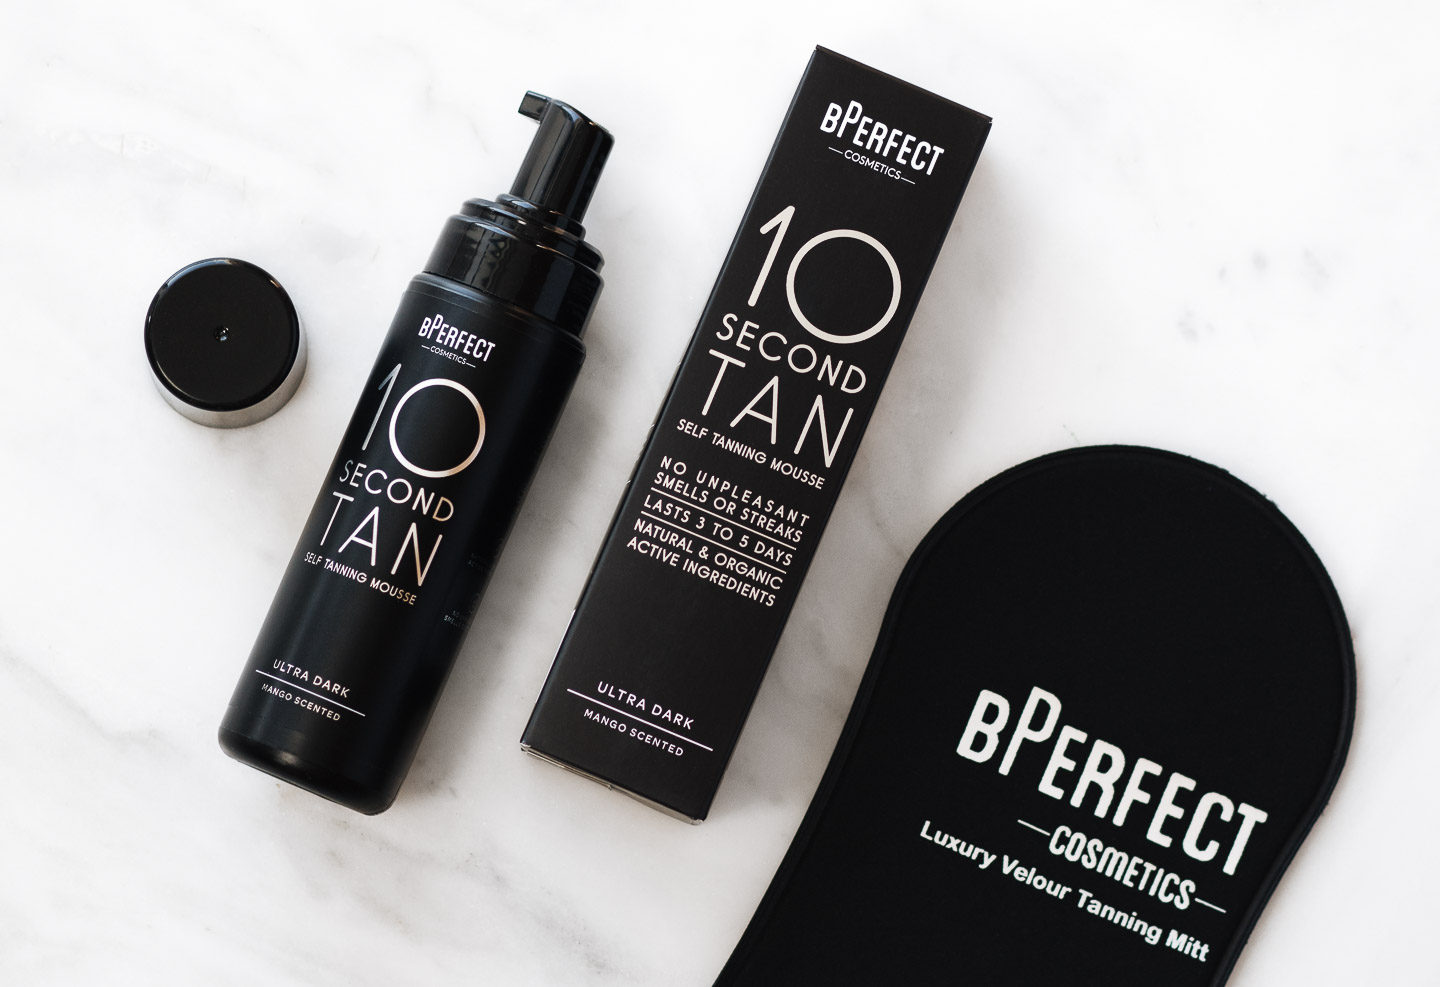 b perfect 10 second tan review